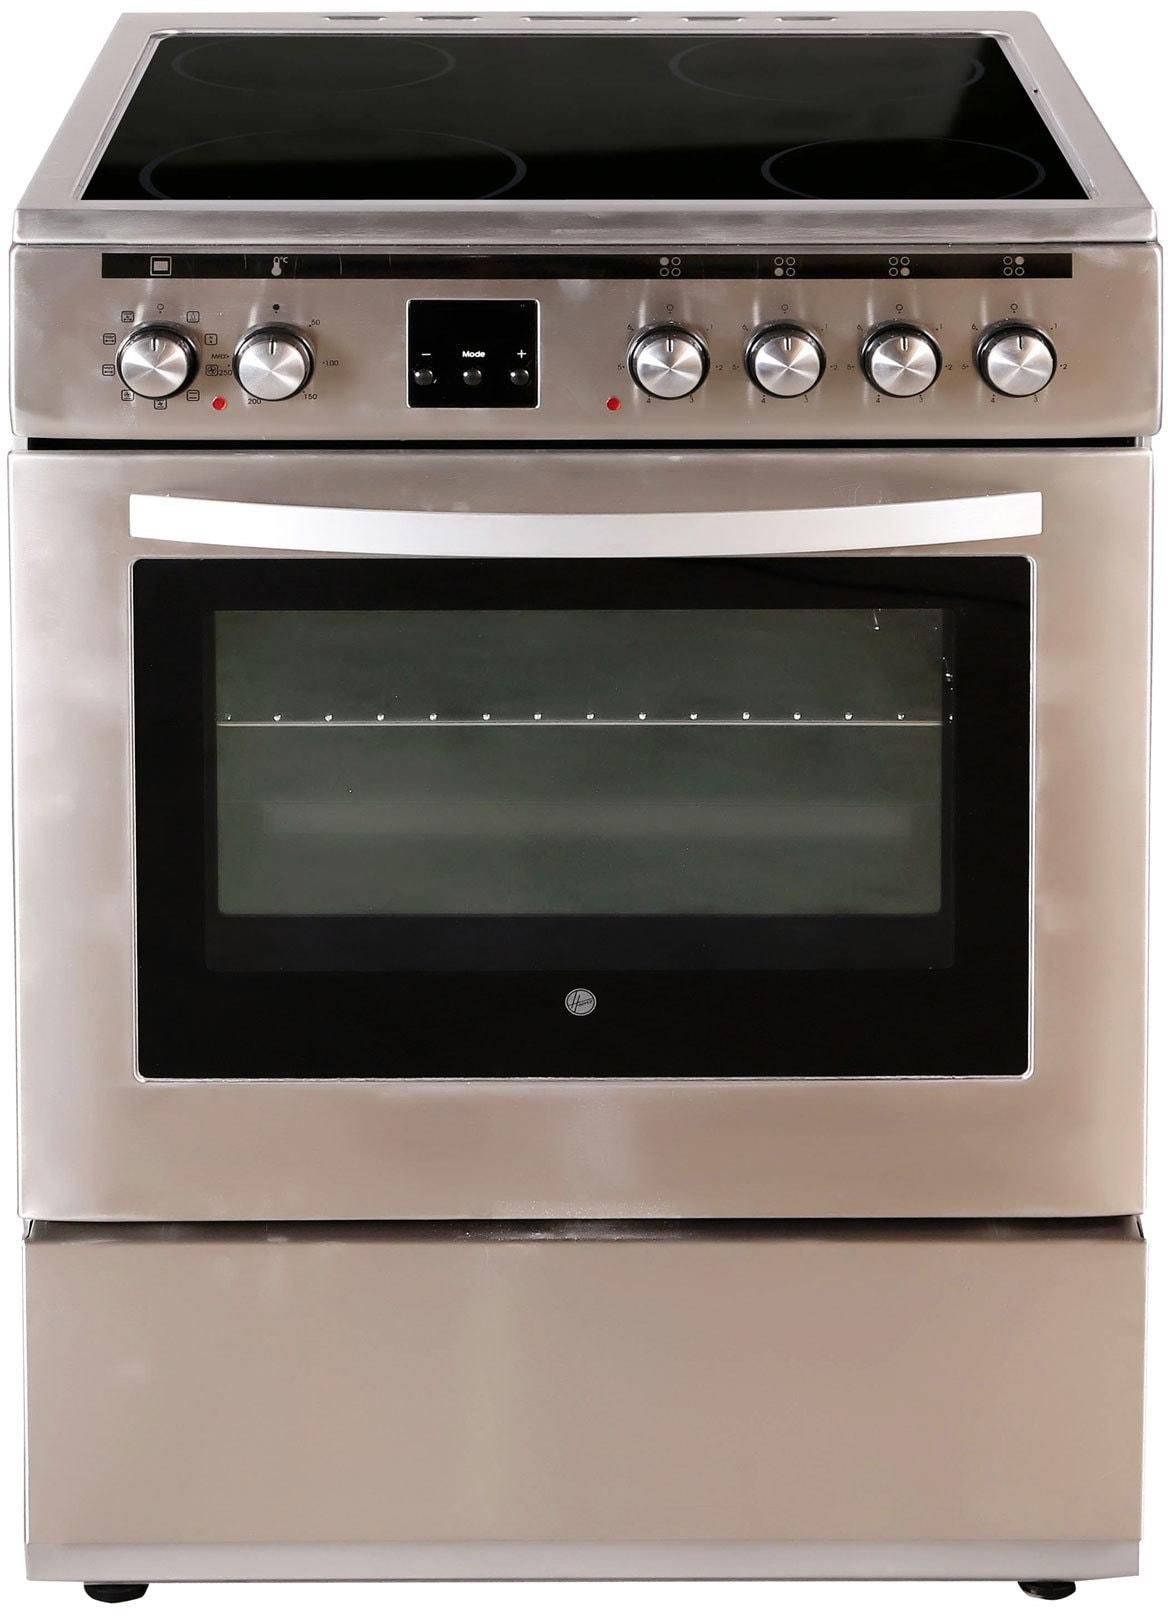 Hoover Free standing 60X60 Cm Electric Cooker 4Ceramic Zone, Electric Oven